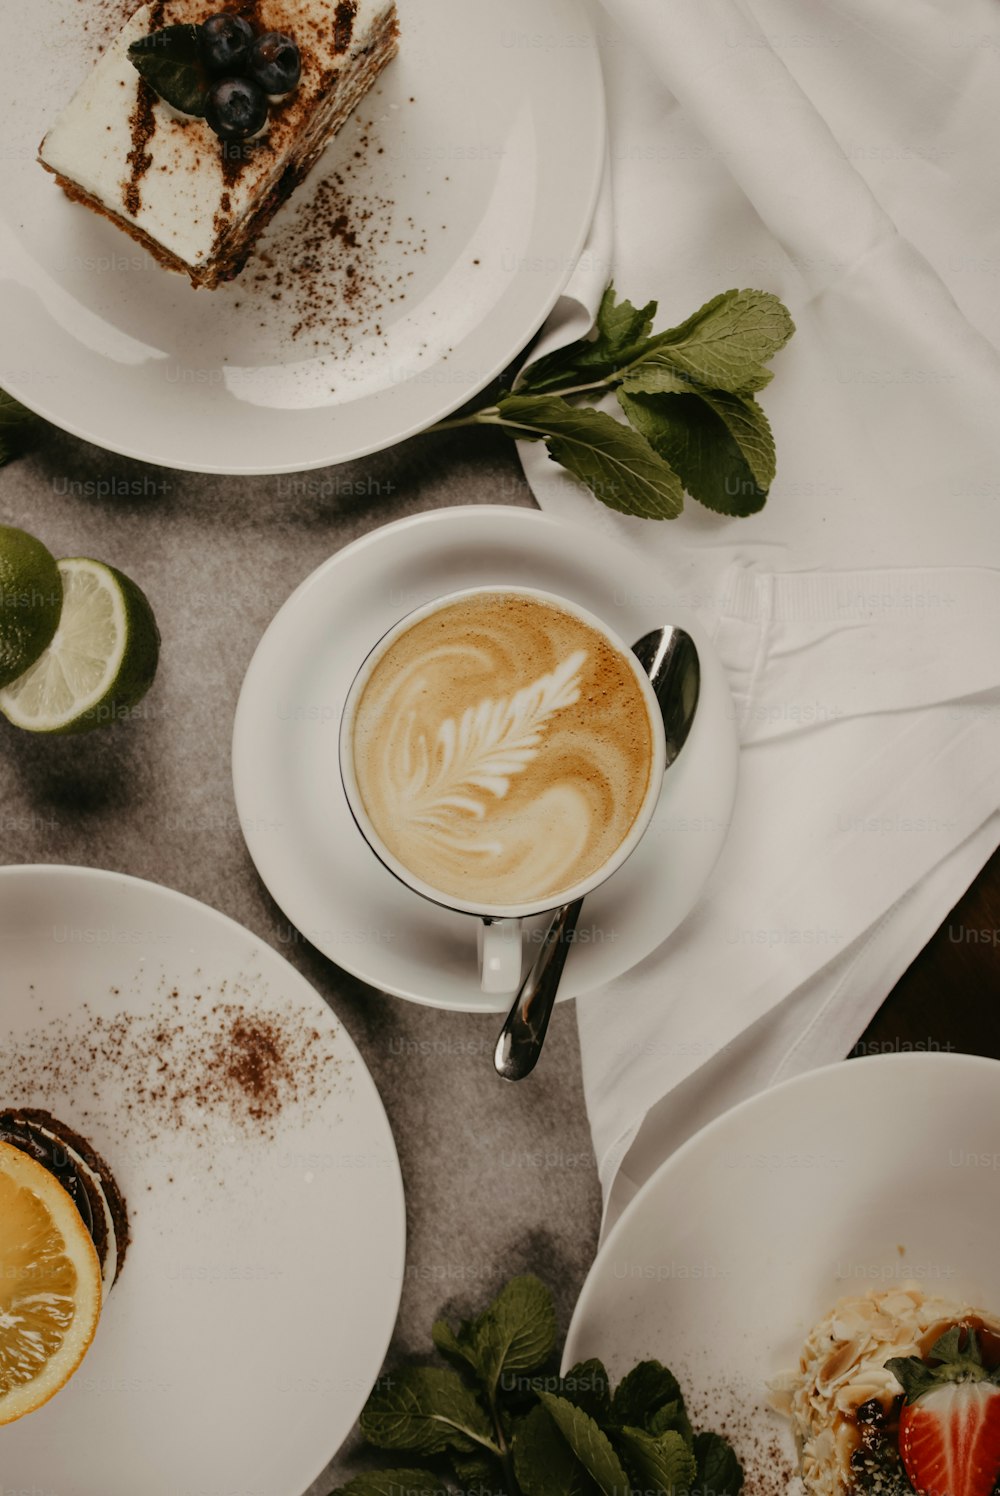 1000+ Cup Of Coffee Pictures  Download Free Images on Unsplash